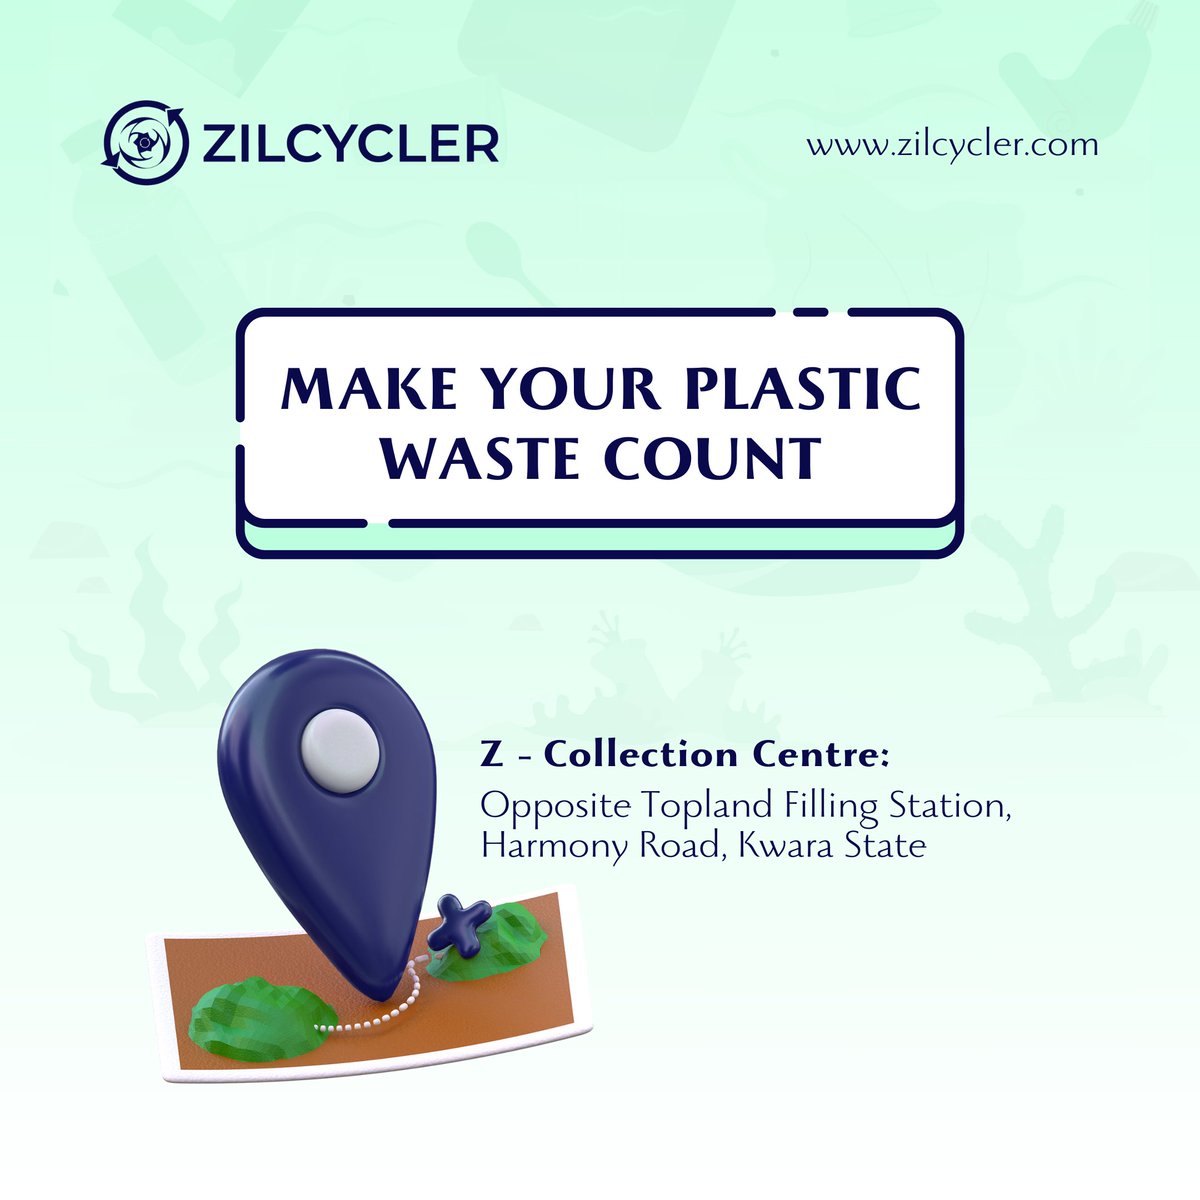 Reach out to us to sell or donate your used plastic bottles. Together, we can make a world of difference!

📍Quick Tip: You can also just search 'Zilcycler' on Google Maps to locate our collection centre.😉

#RecyclingCompany #PlasticWaste #WasteManagement #Recycle #Zilcycler